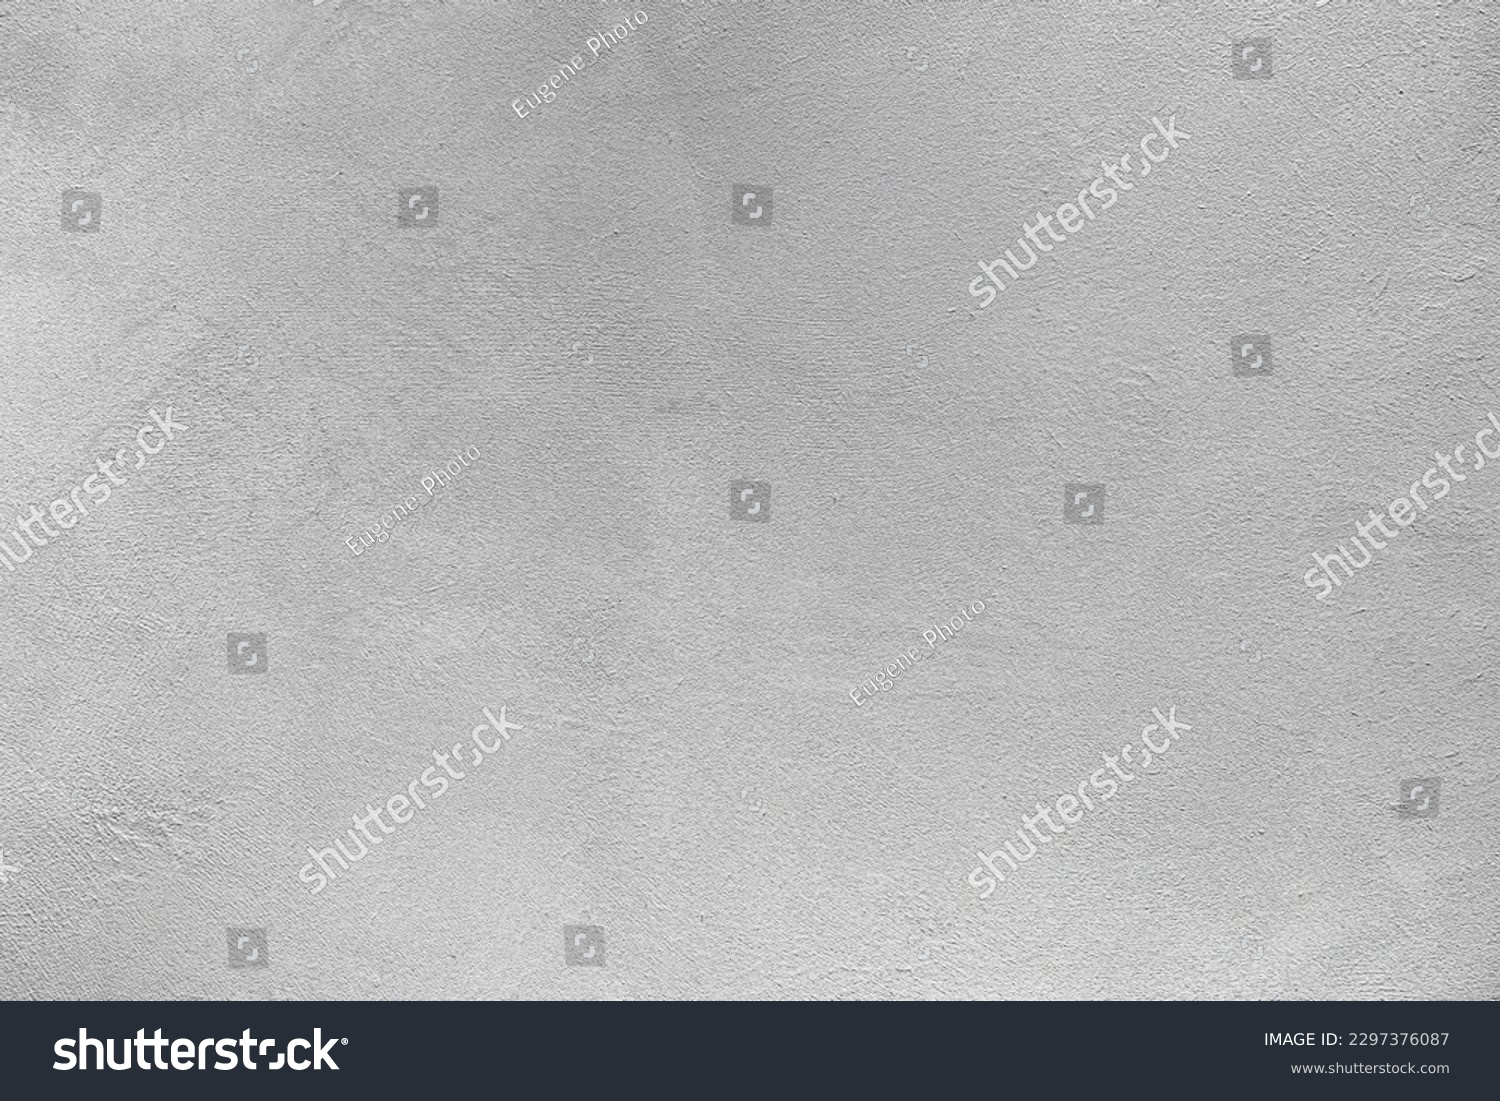 Texture of gray decorative plaster or concrete. Abstract grunge background for design. #2297376087